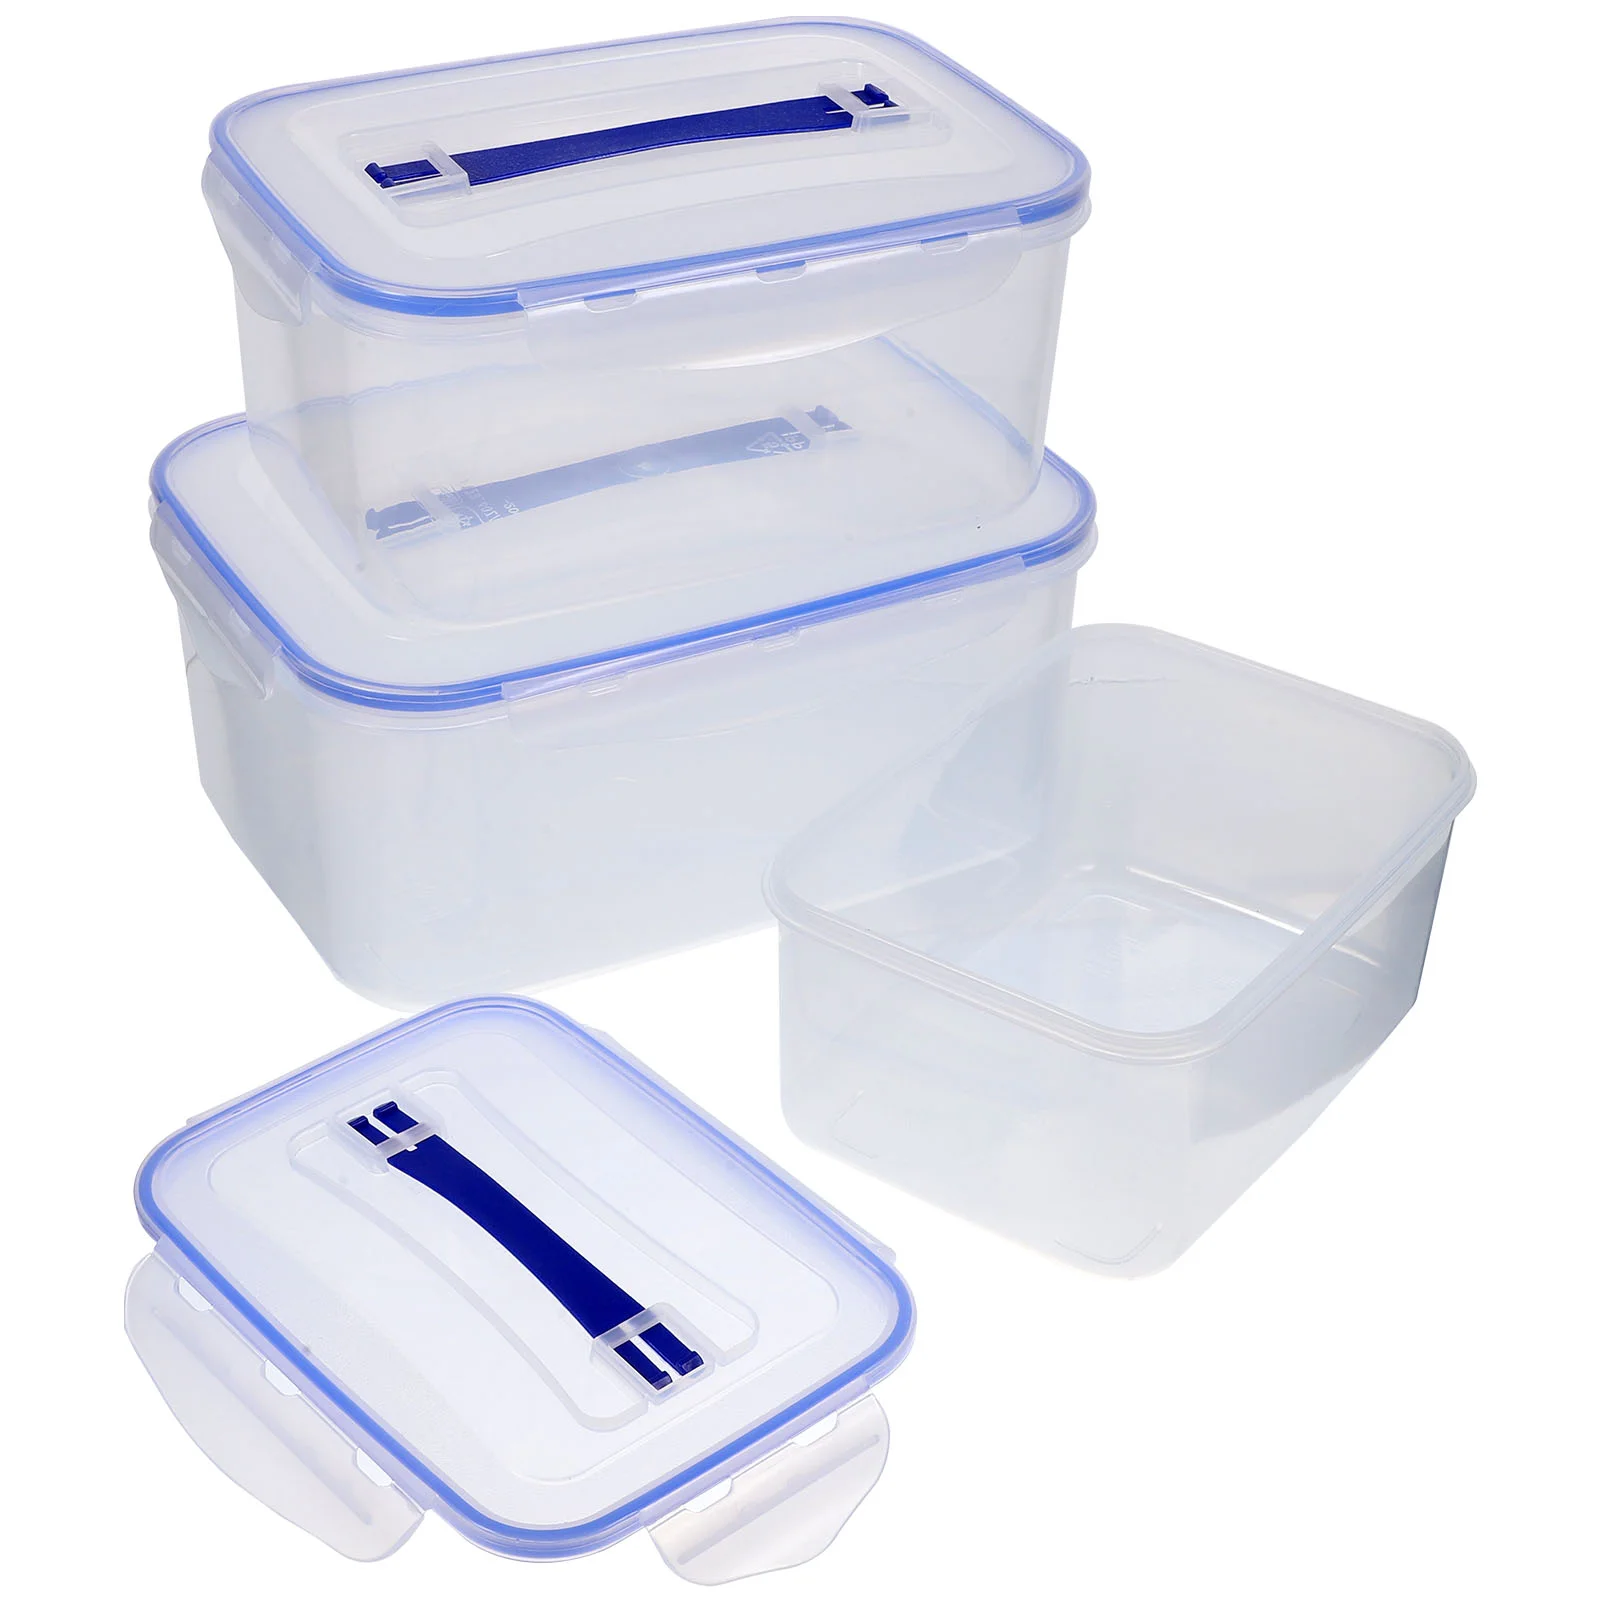 

3 Pcs Airtight Plastic Container Containers Medium Small Pp Kitchen Storage Canister Food Handle